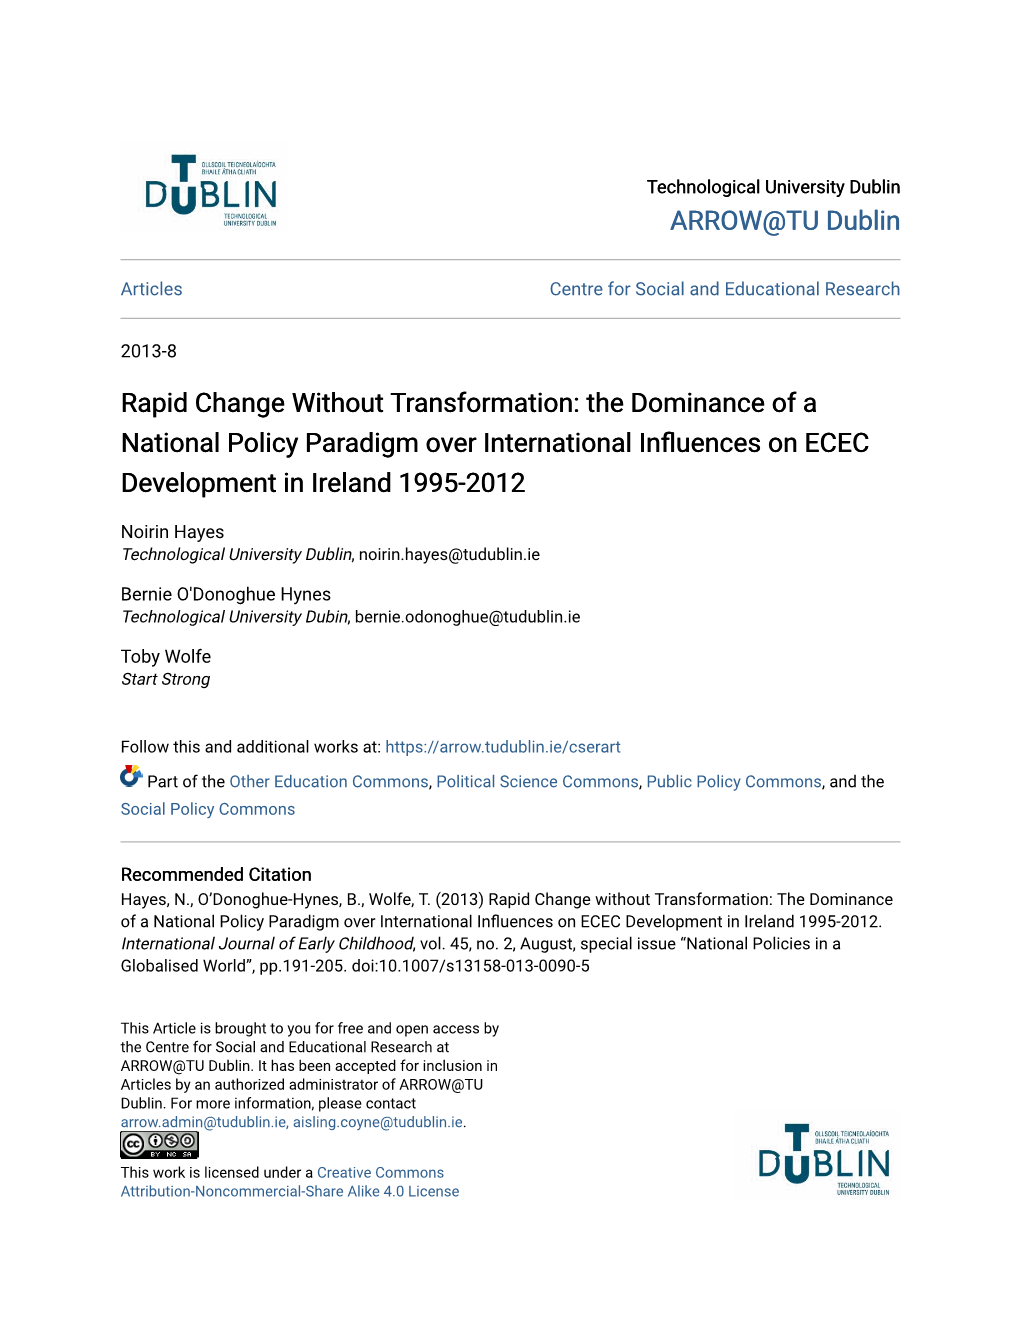 The Dominance of a National Policy Paradigm Over International Influences on ECEC Development in Ireland 1995-2012